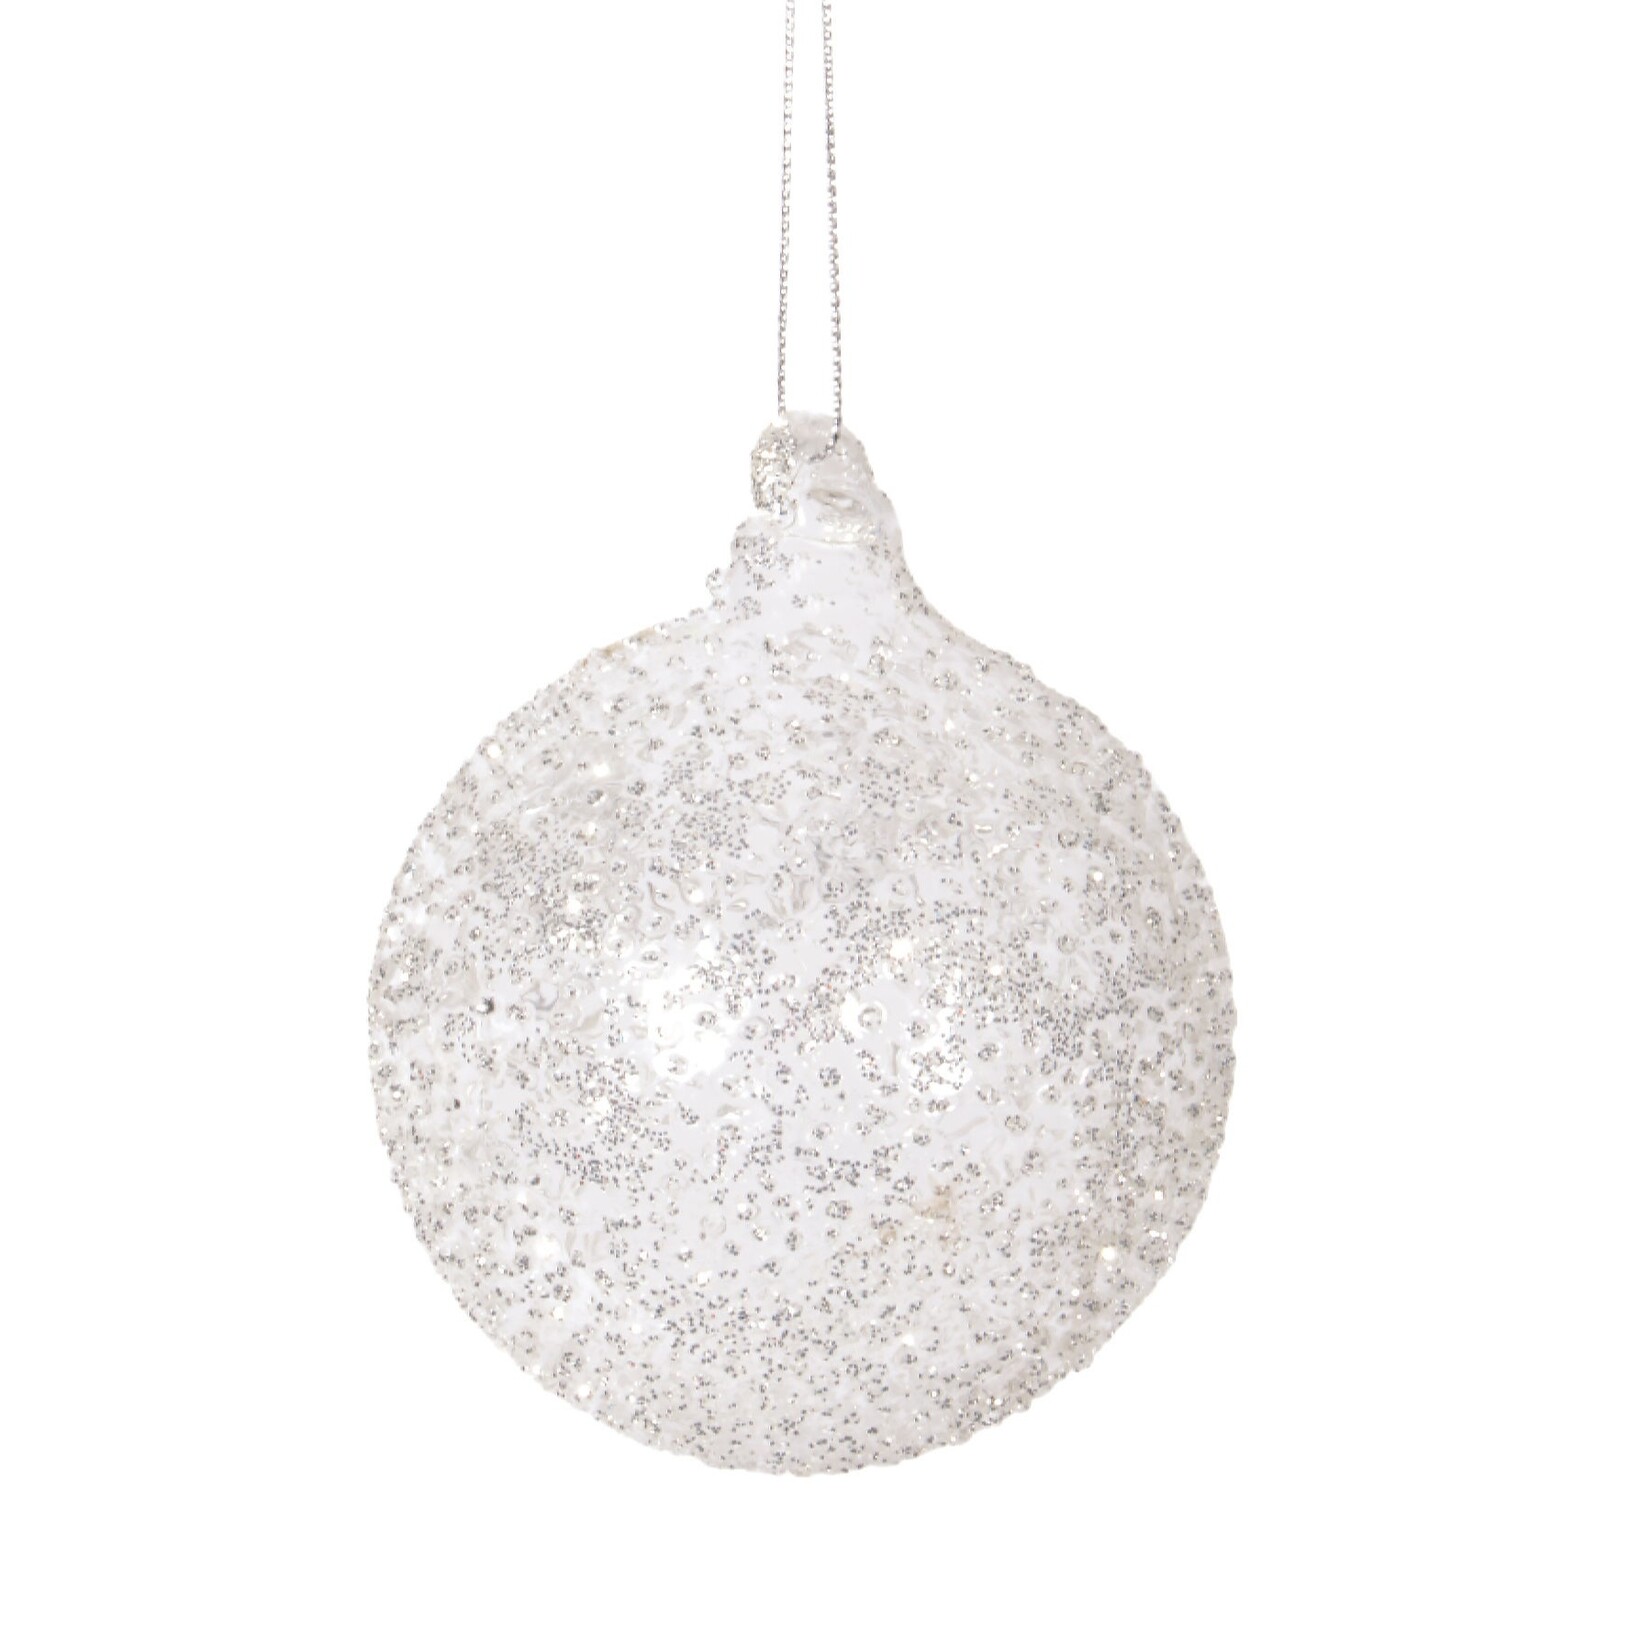 Rosemary and Thyme ORNAMENT-BALL GLASS ICE(XMS23)